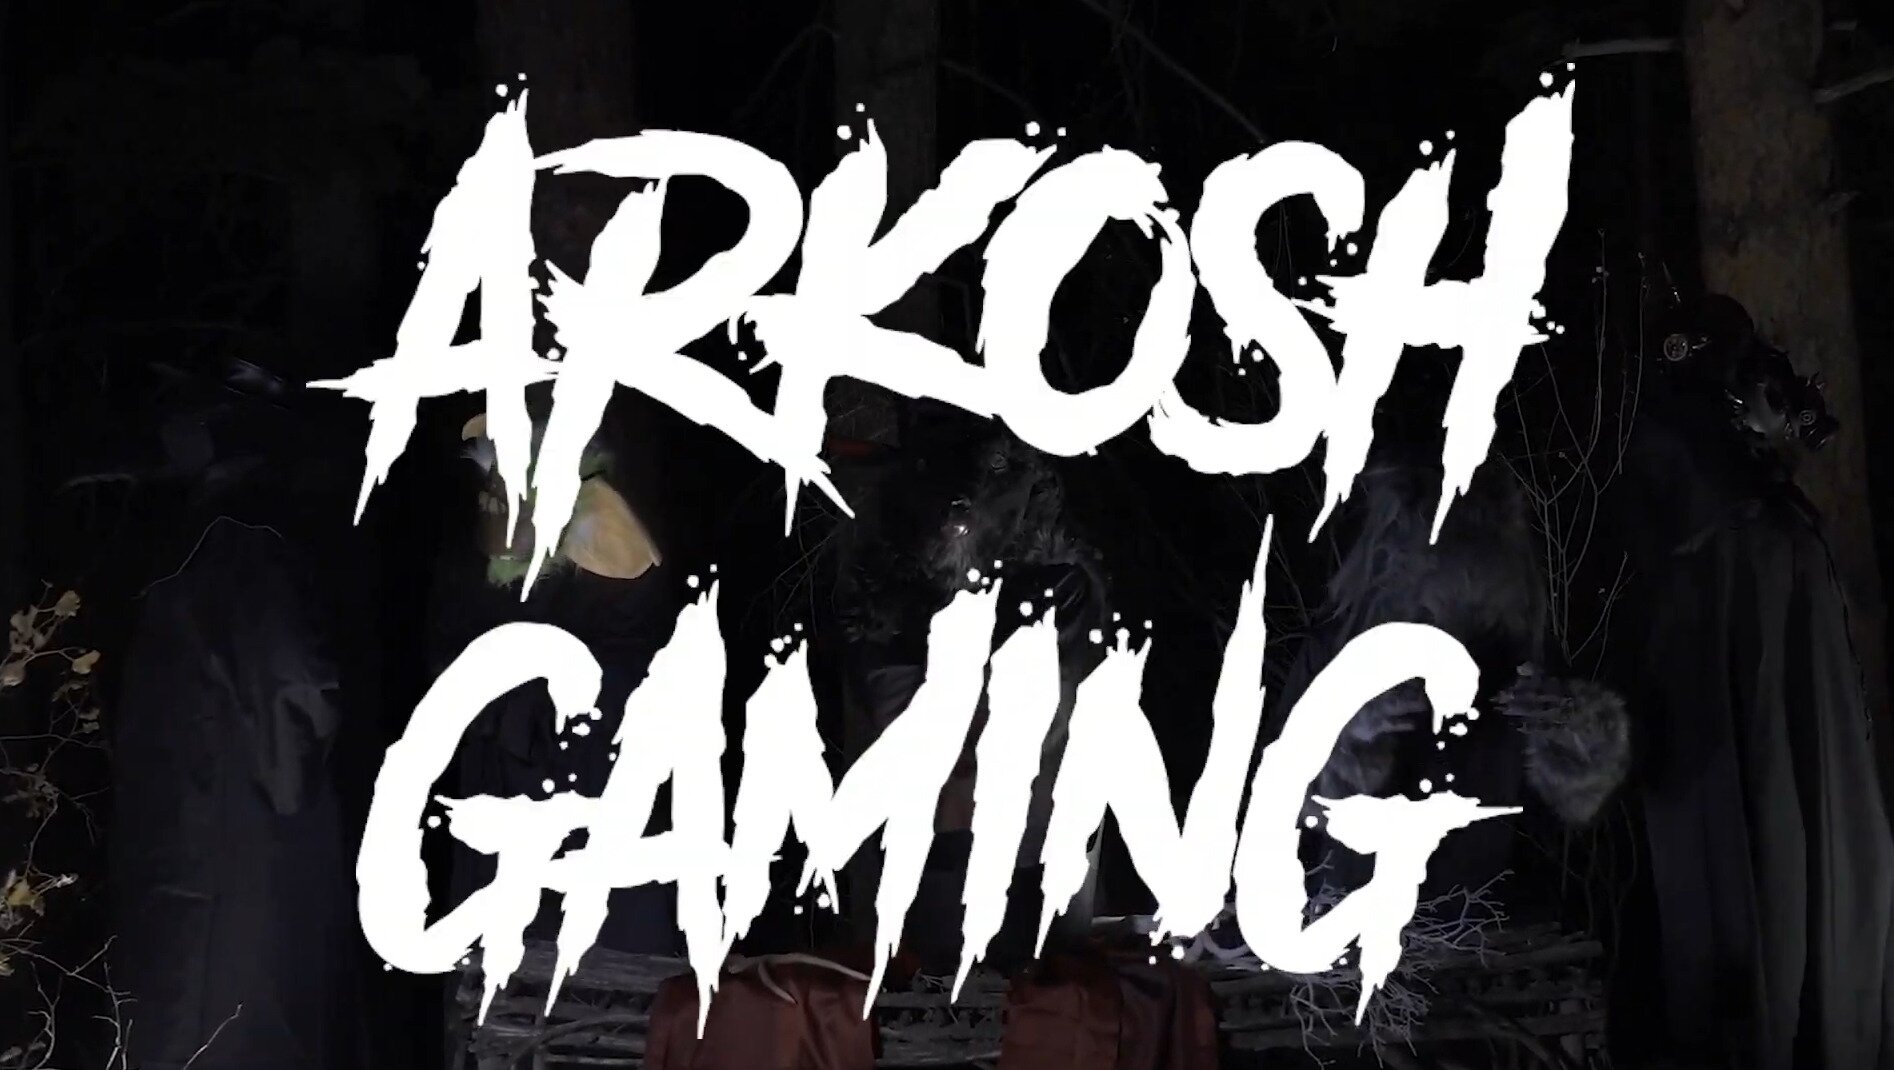 Arkosh Gaming was revealed today in a very loud heavy metal music video (Image via SirActionSlacks)